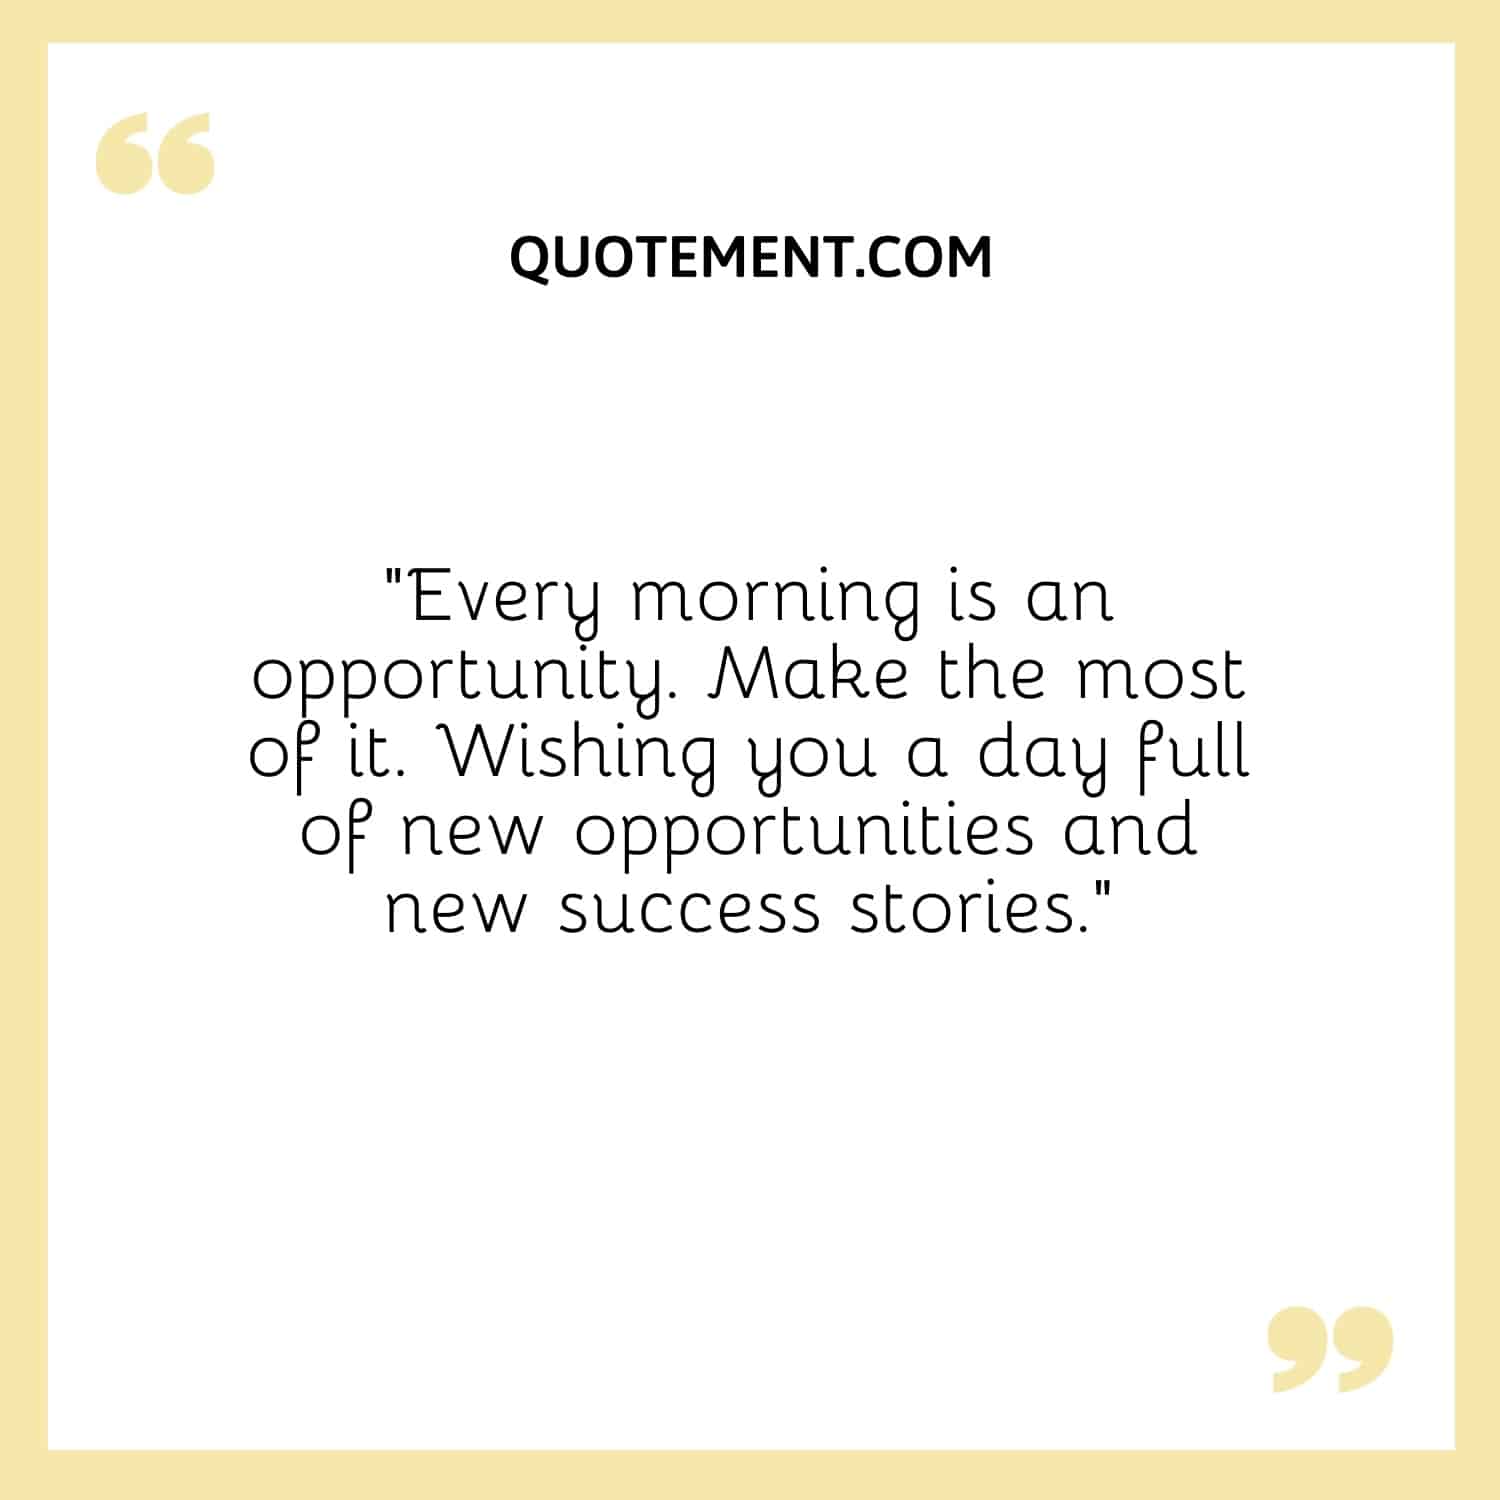 Wishing you a day full of new opportunities and new success stories